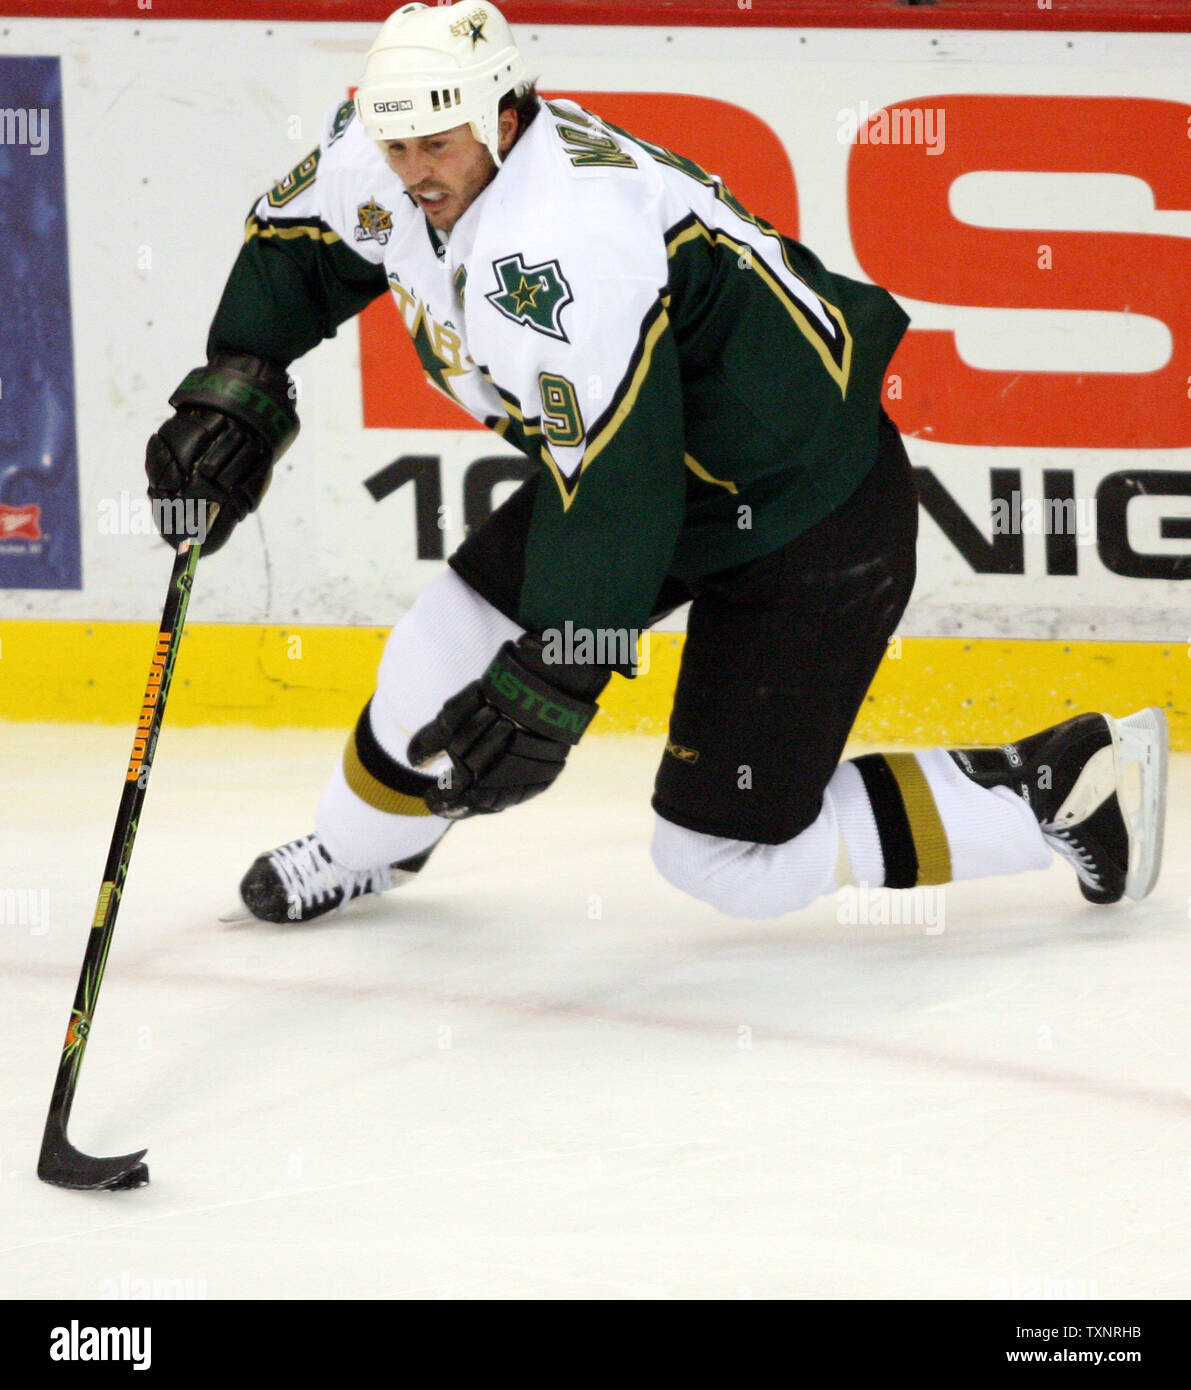 Ex-North Star Mike Modano reportedly to join Red Wings – Twin Cities